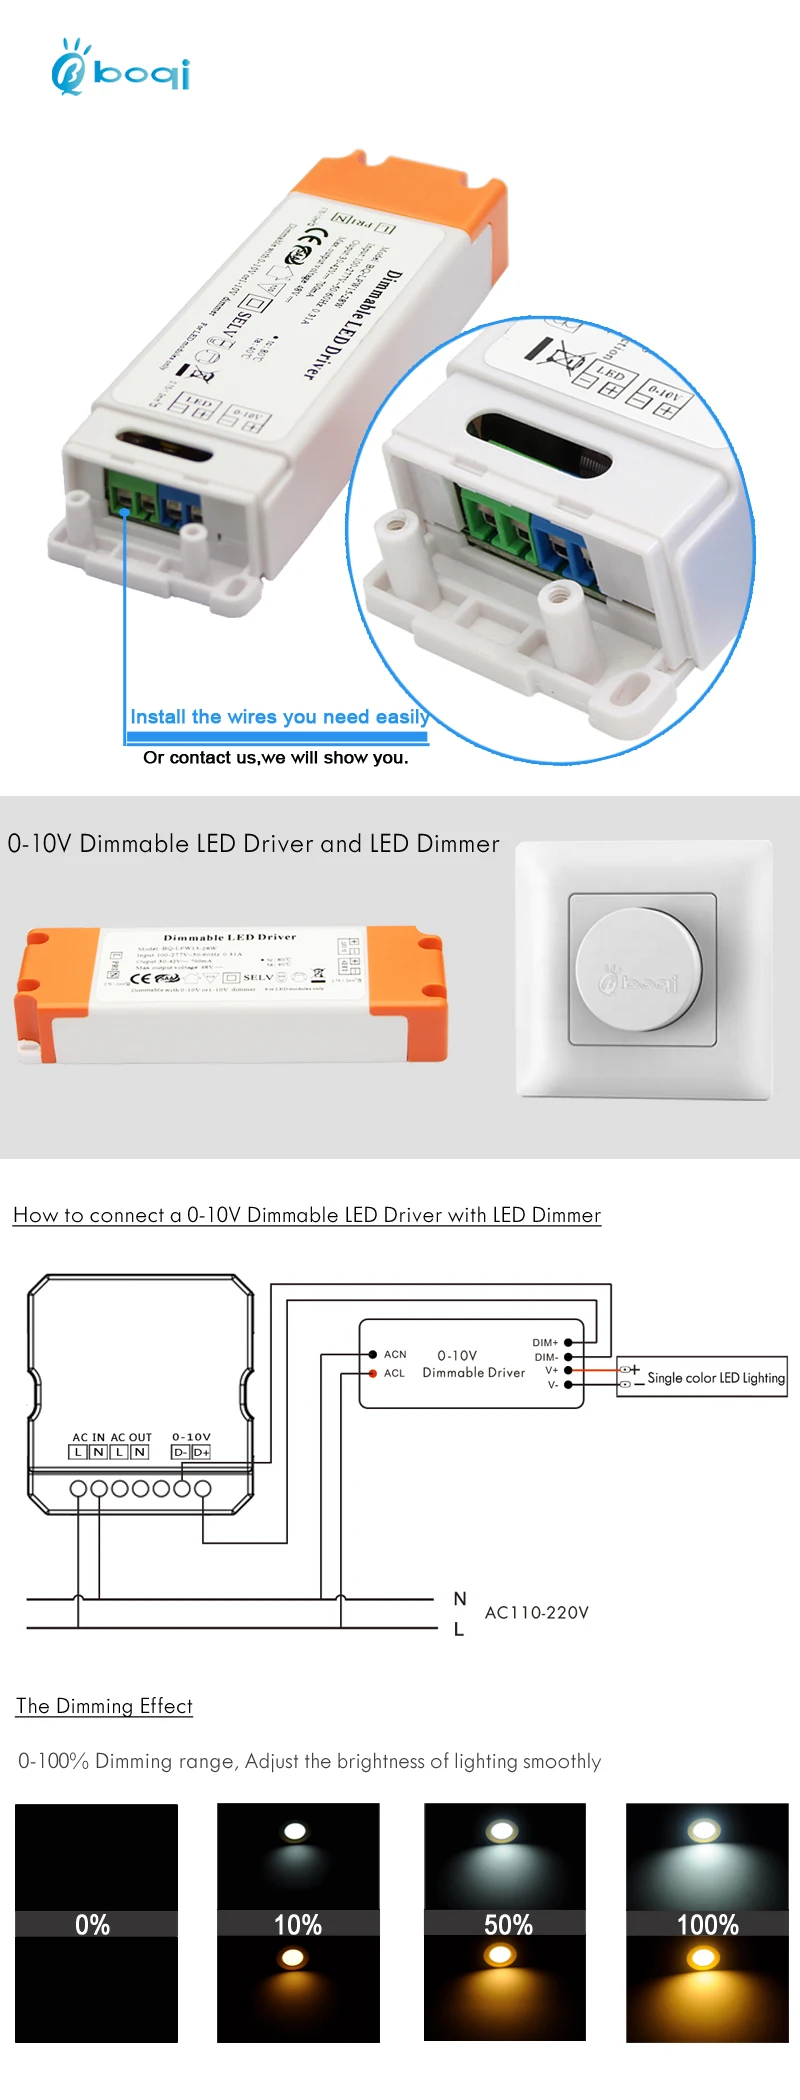 boqi 0-10v dimmable led driver 42v 400ma 18w dimming led driver with CE SAA